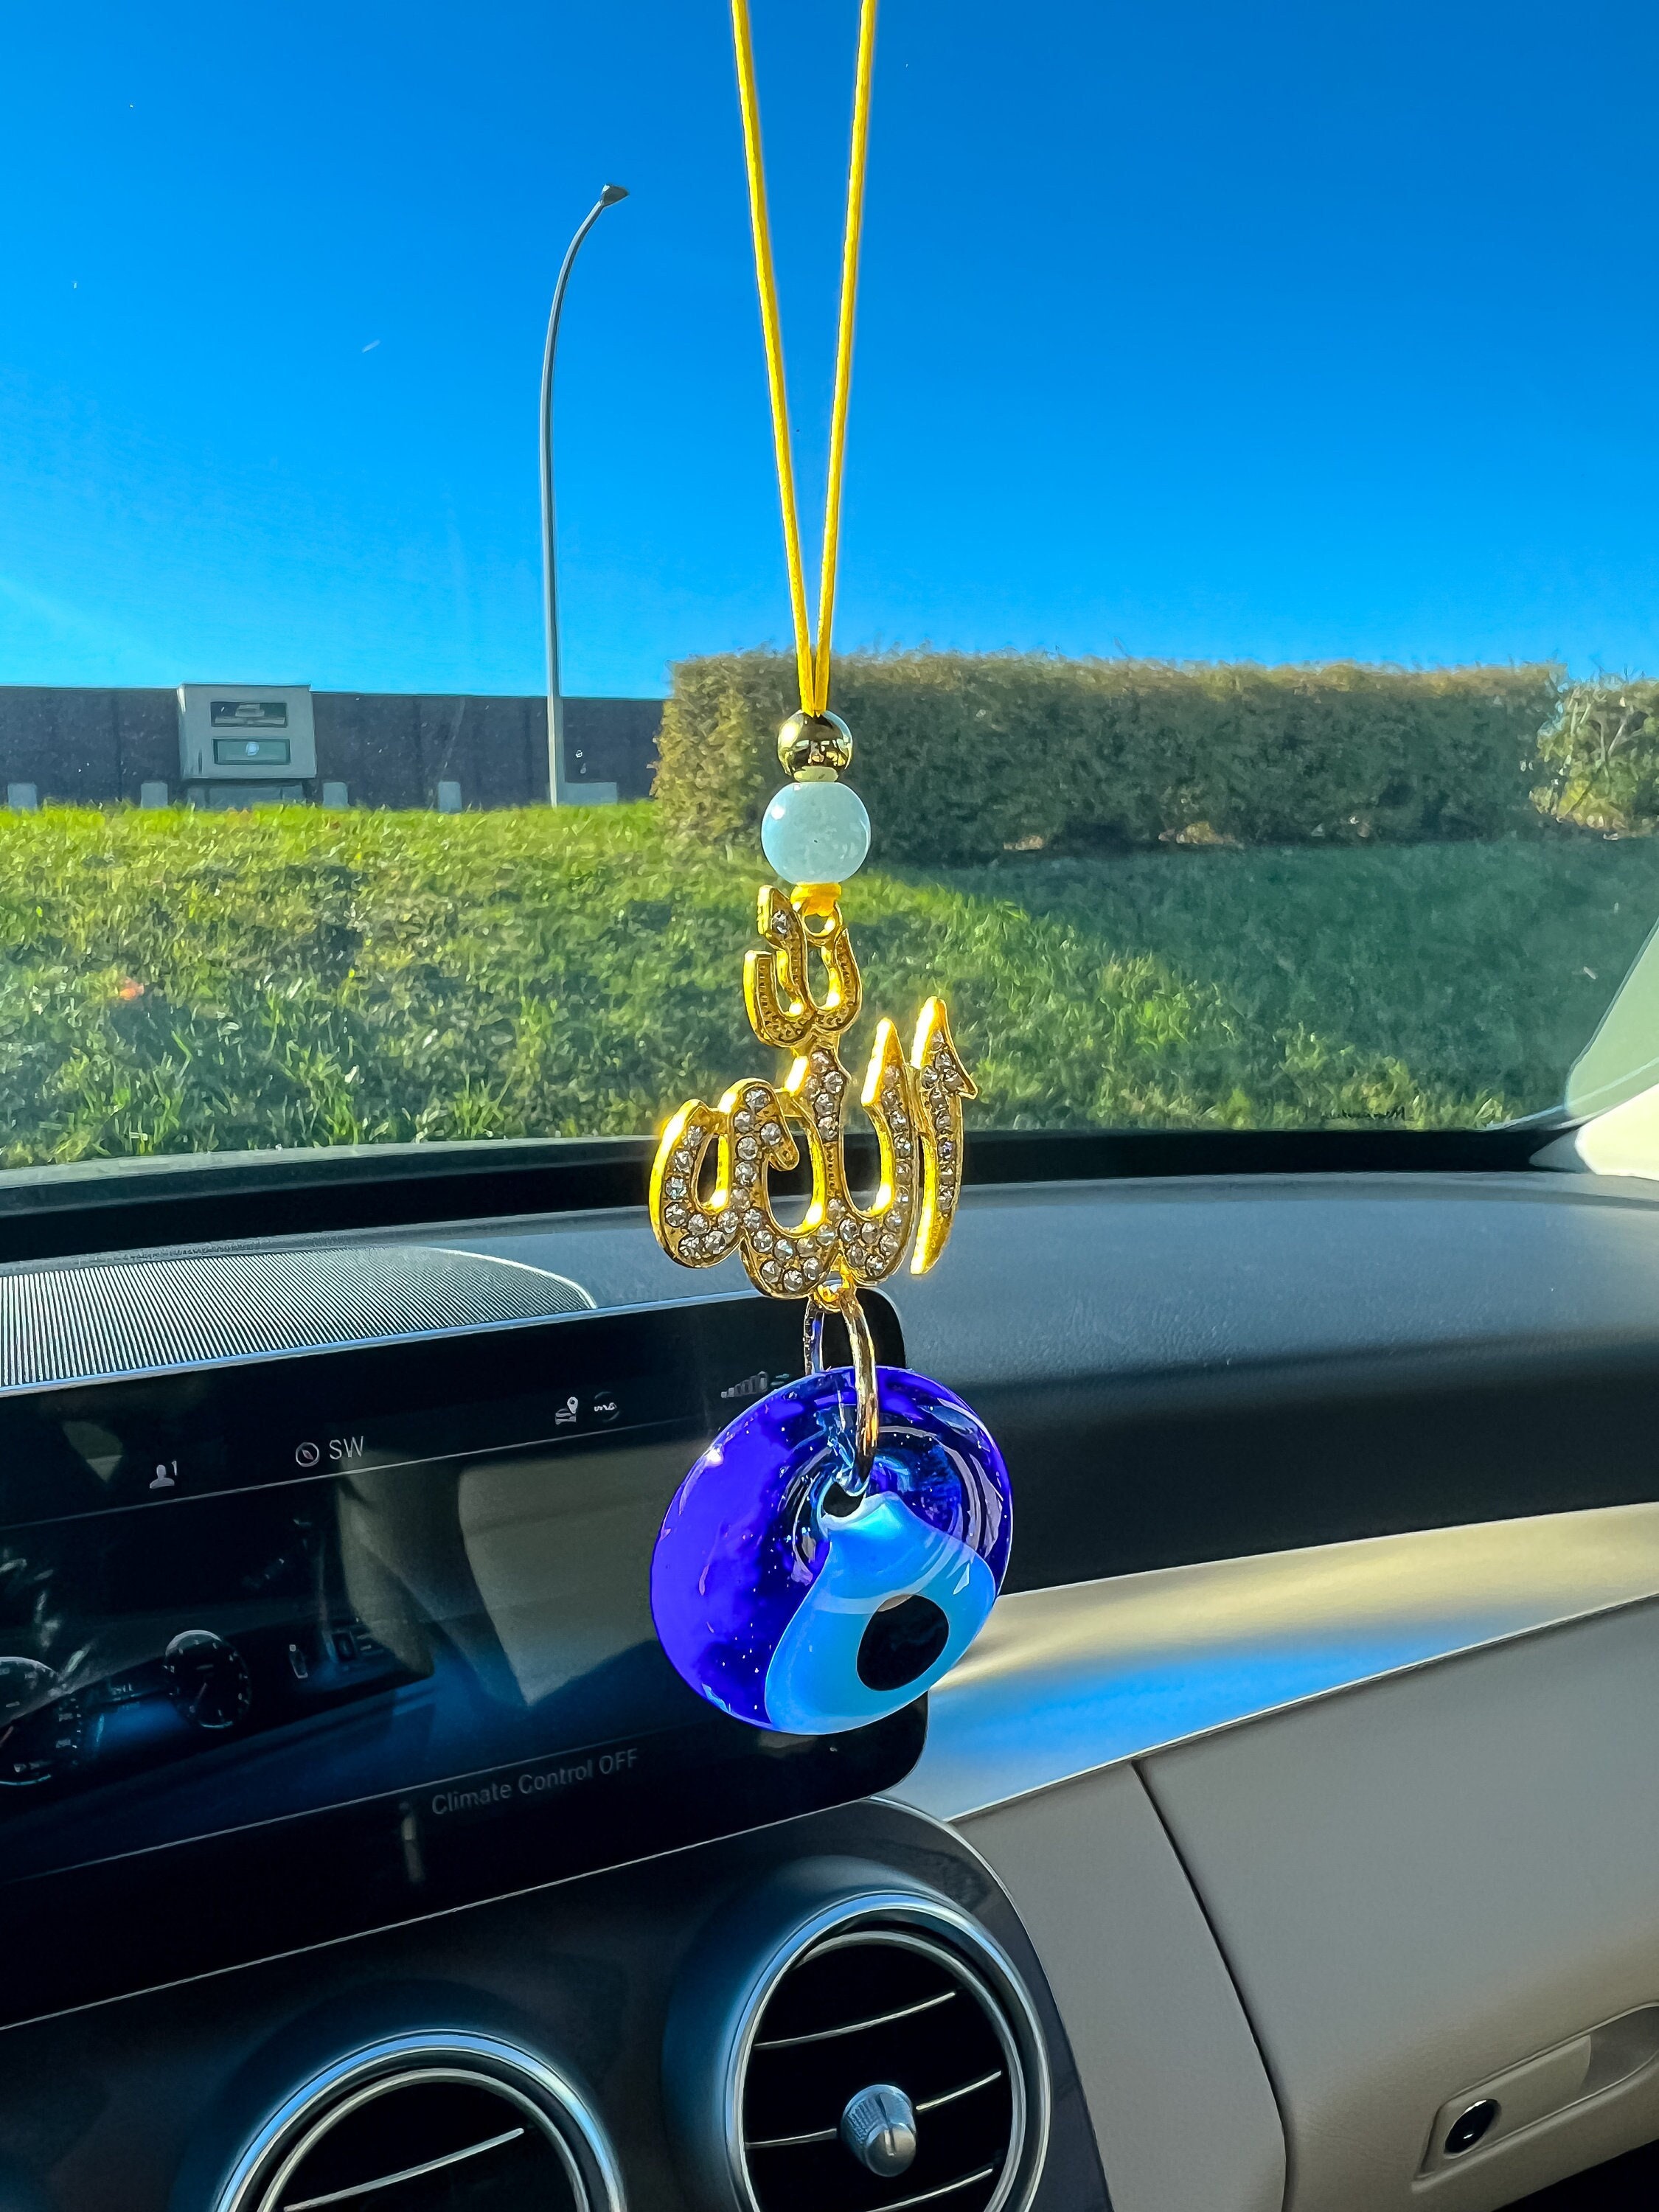 Car Rear View Hanging Accessories Cute Cat Pendant Novelty Funny Decoration  For Trailer Interior Ornament Tree Ornaments 